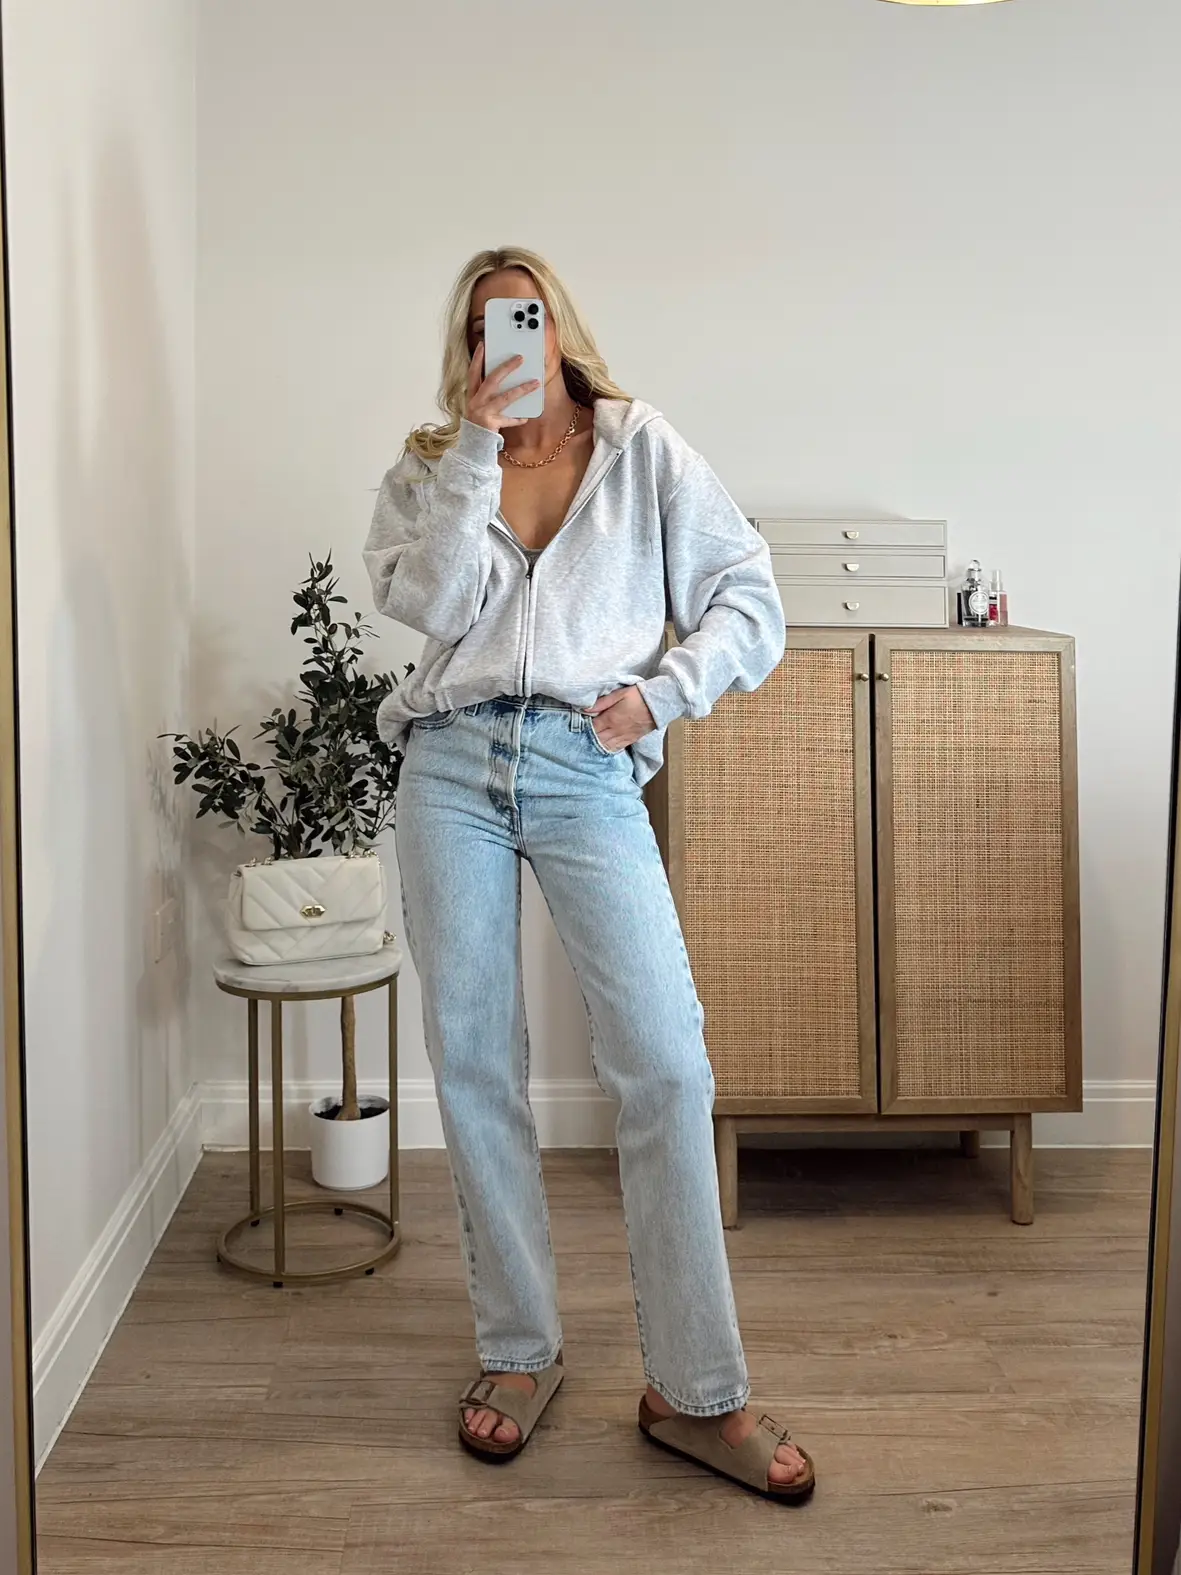 I Tried the Ribcage Jeans Fashion Girls Are Obsessing Over